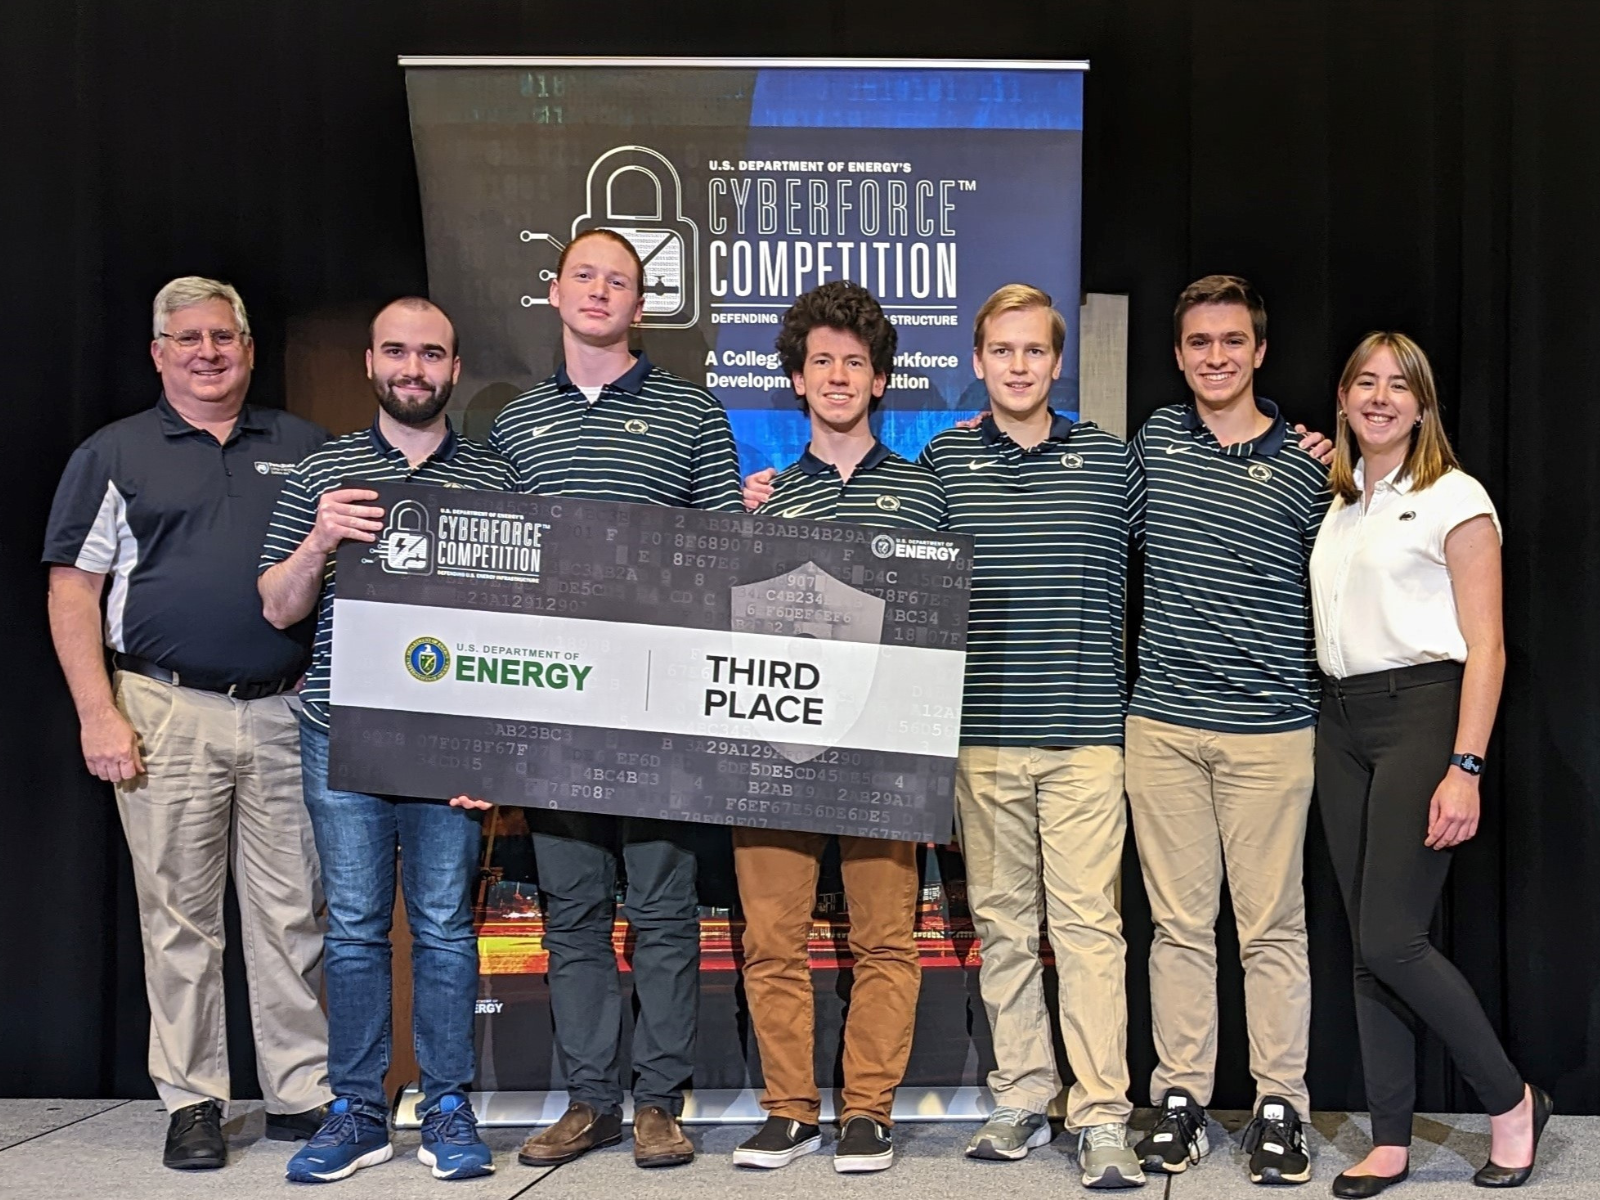 Penn State cybersecurity team places third in CyberForce Competition